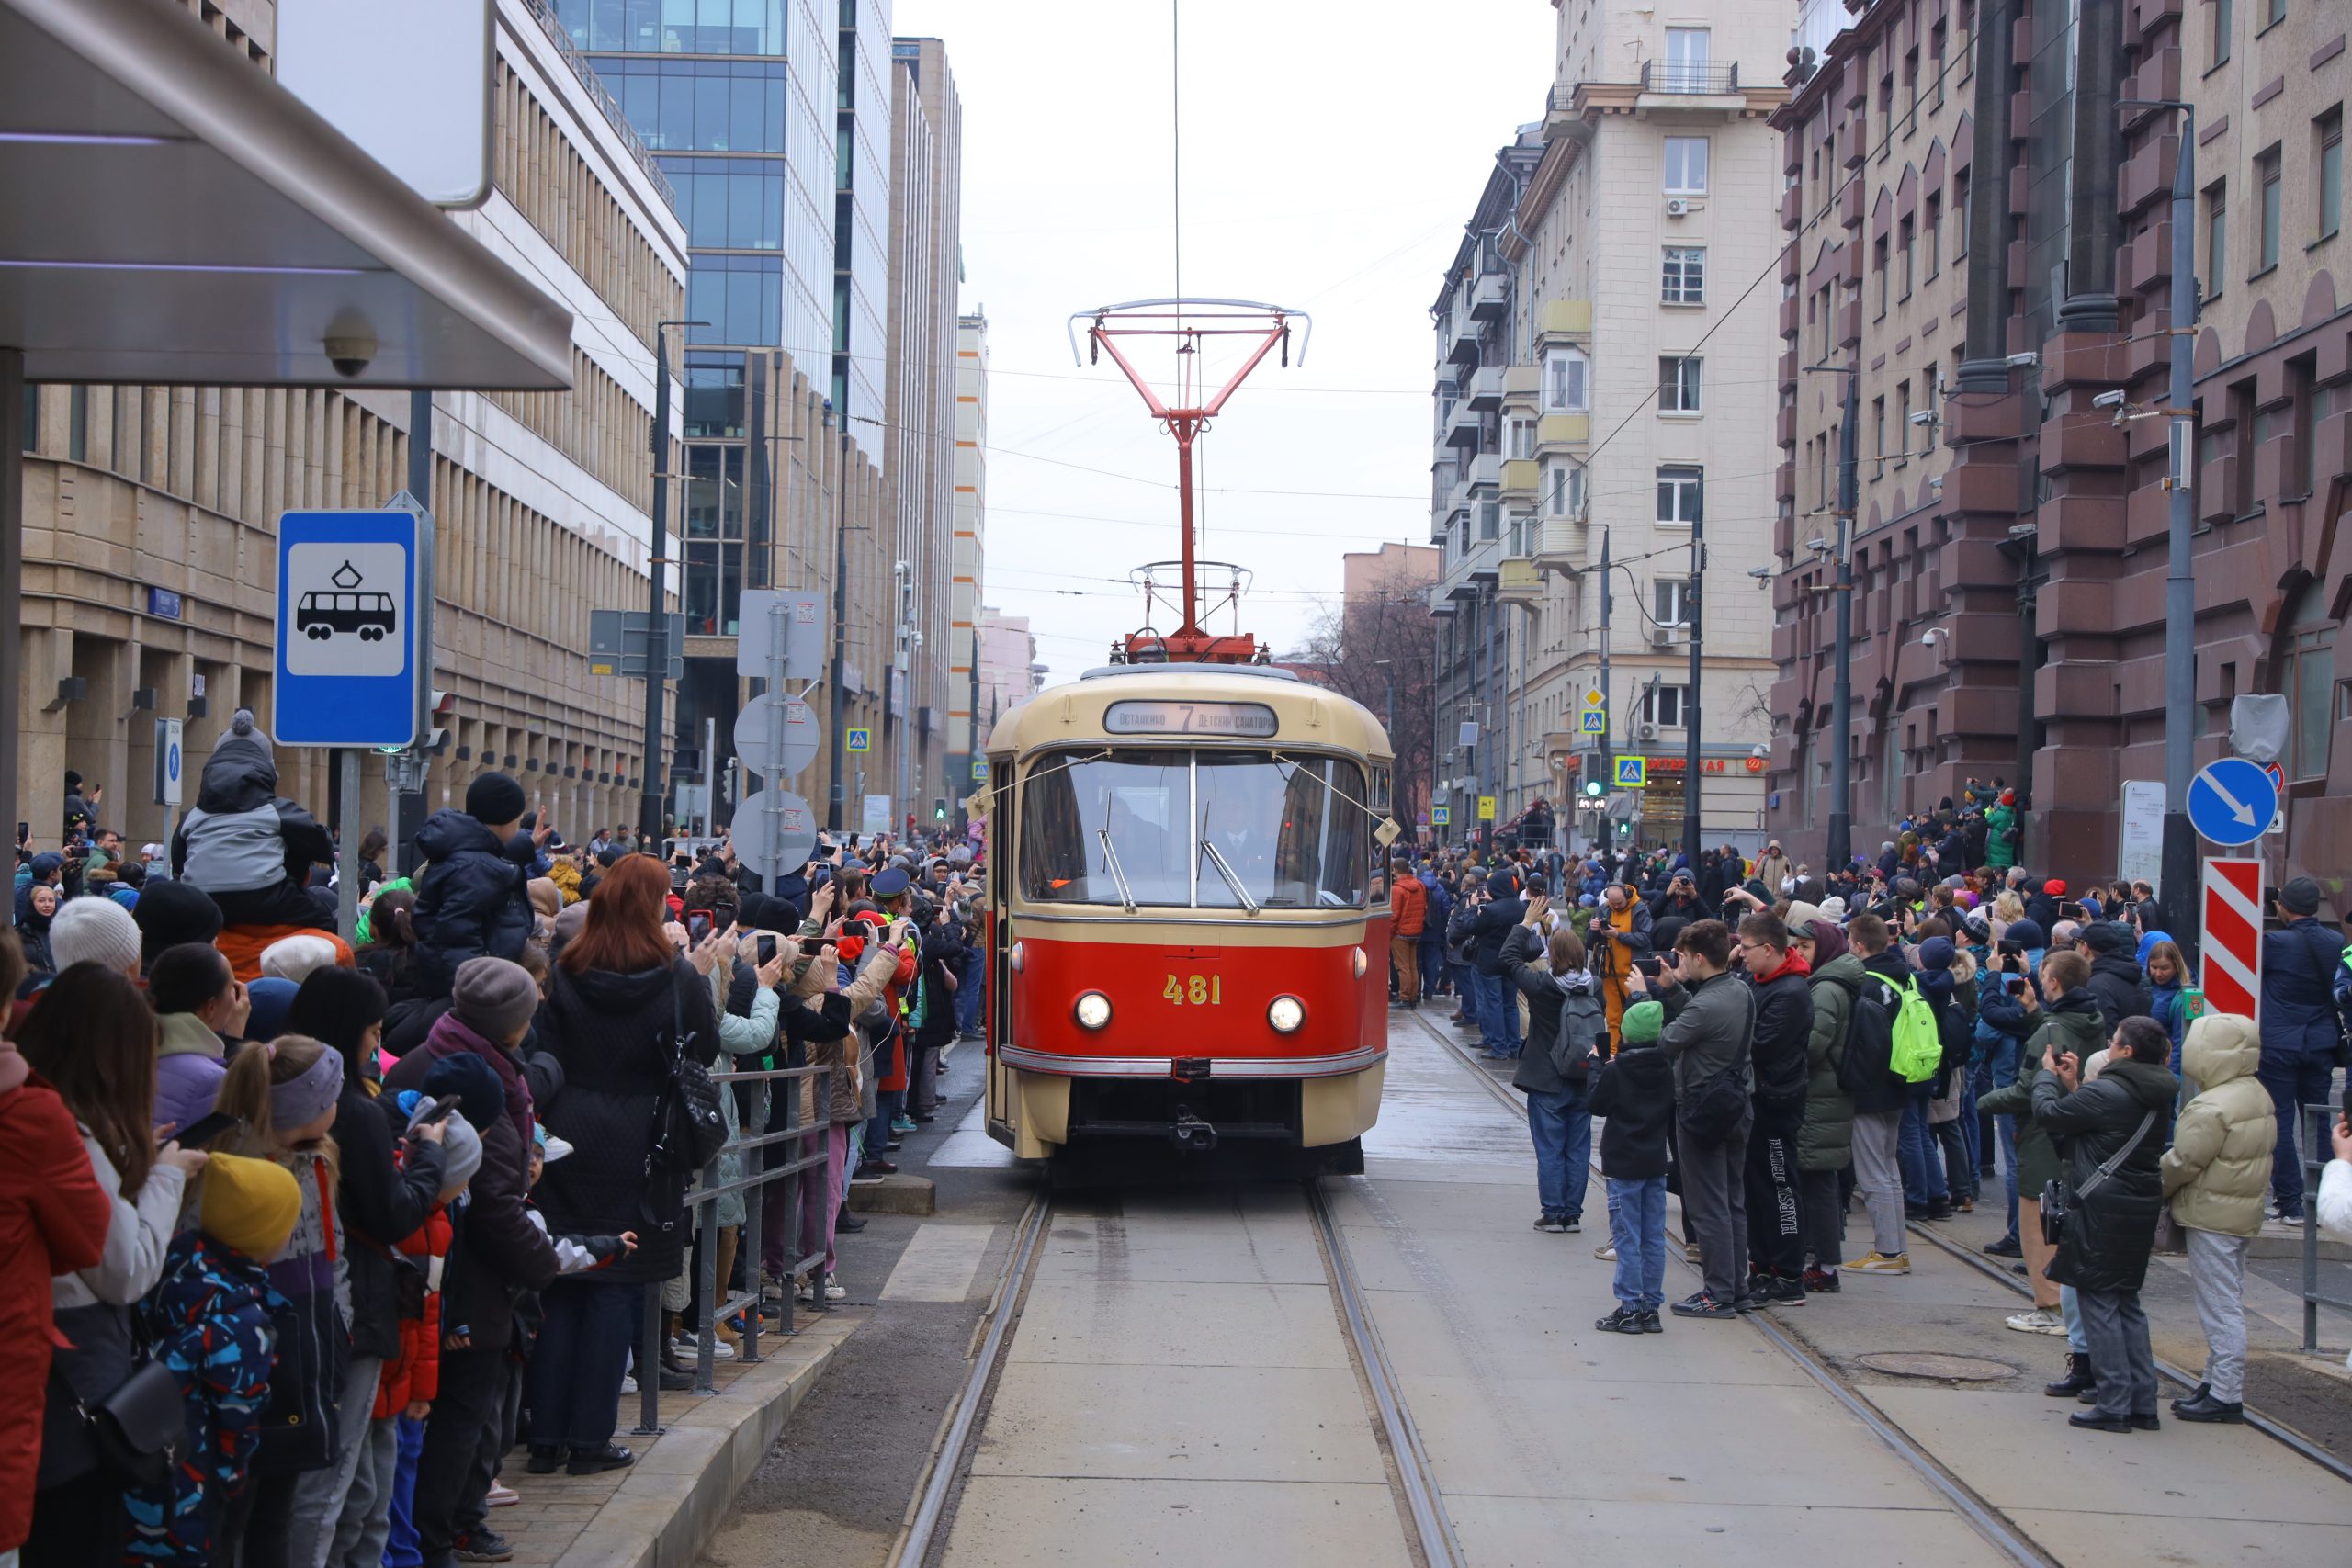 Historic tram in Moscow during the anniversary parade this year. (Photo: Moscow Metro)